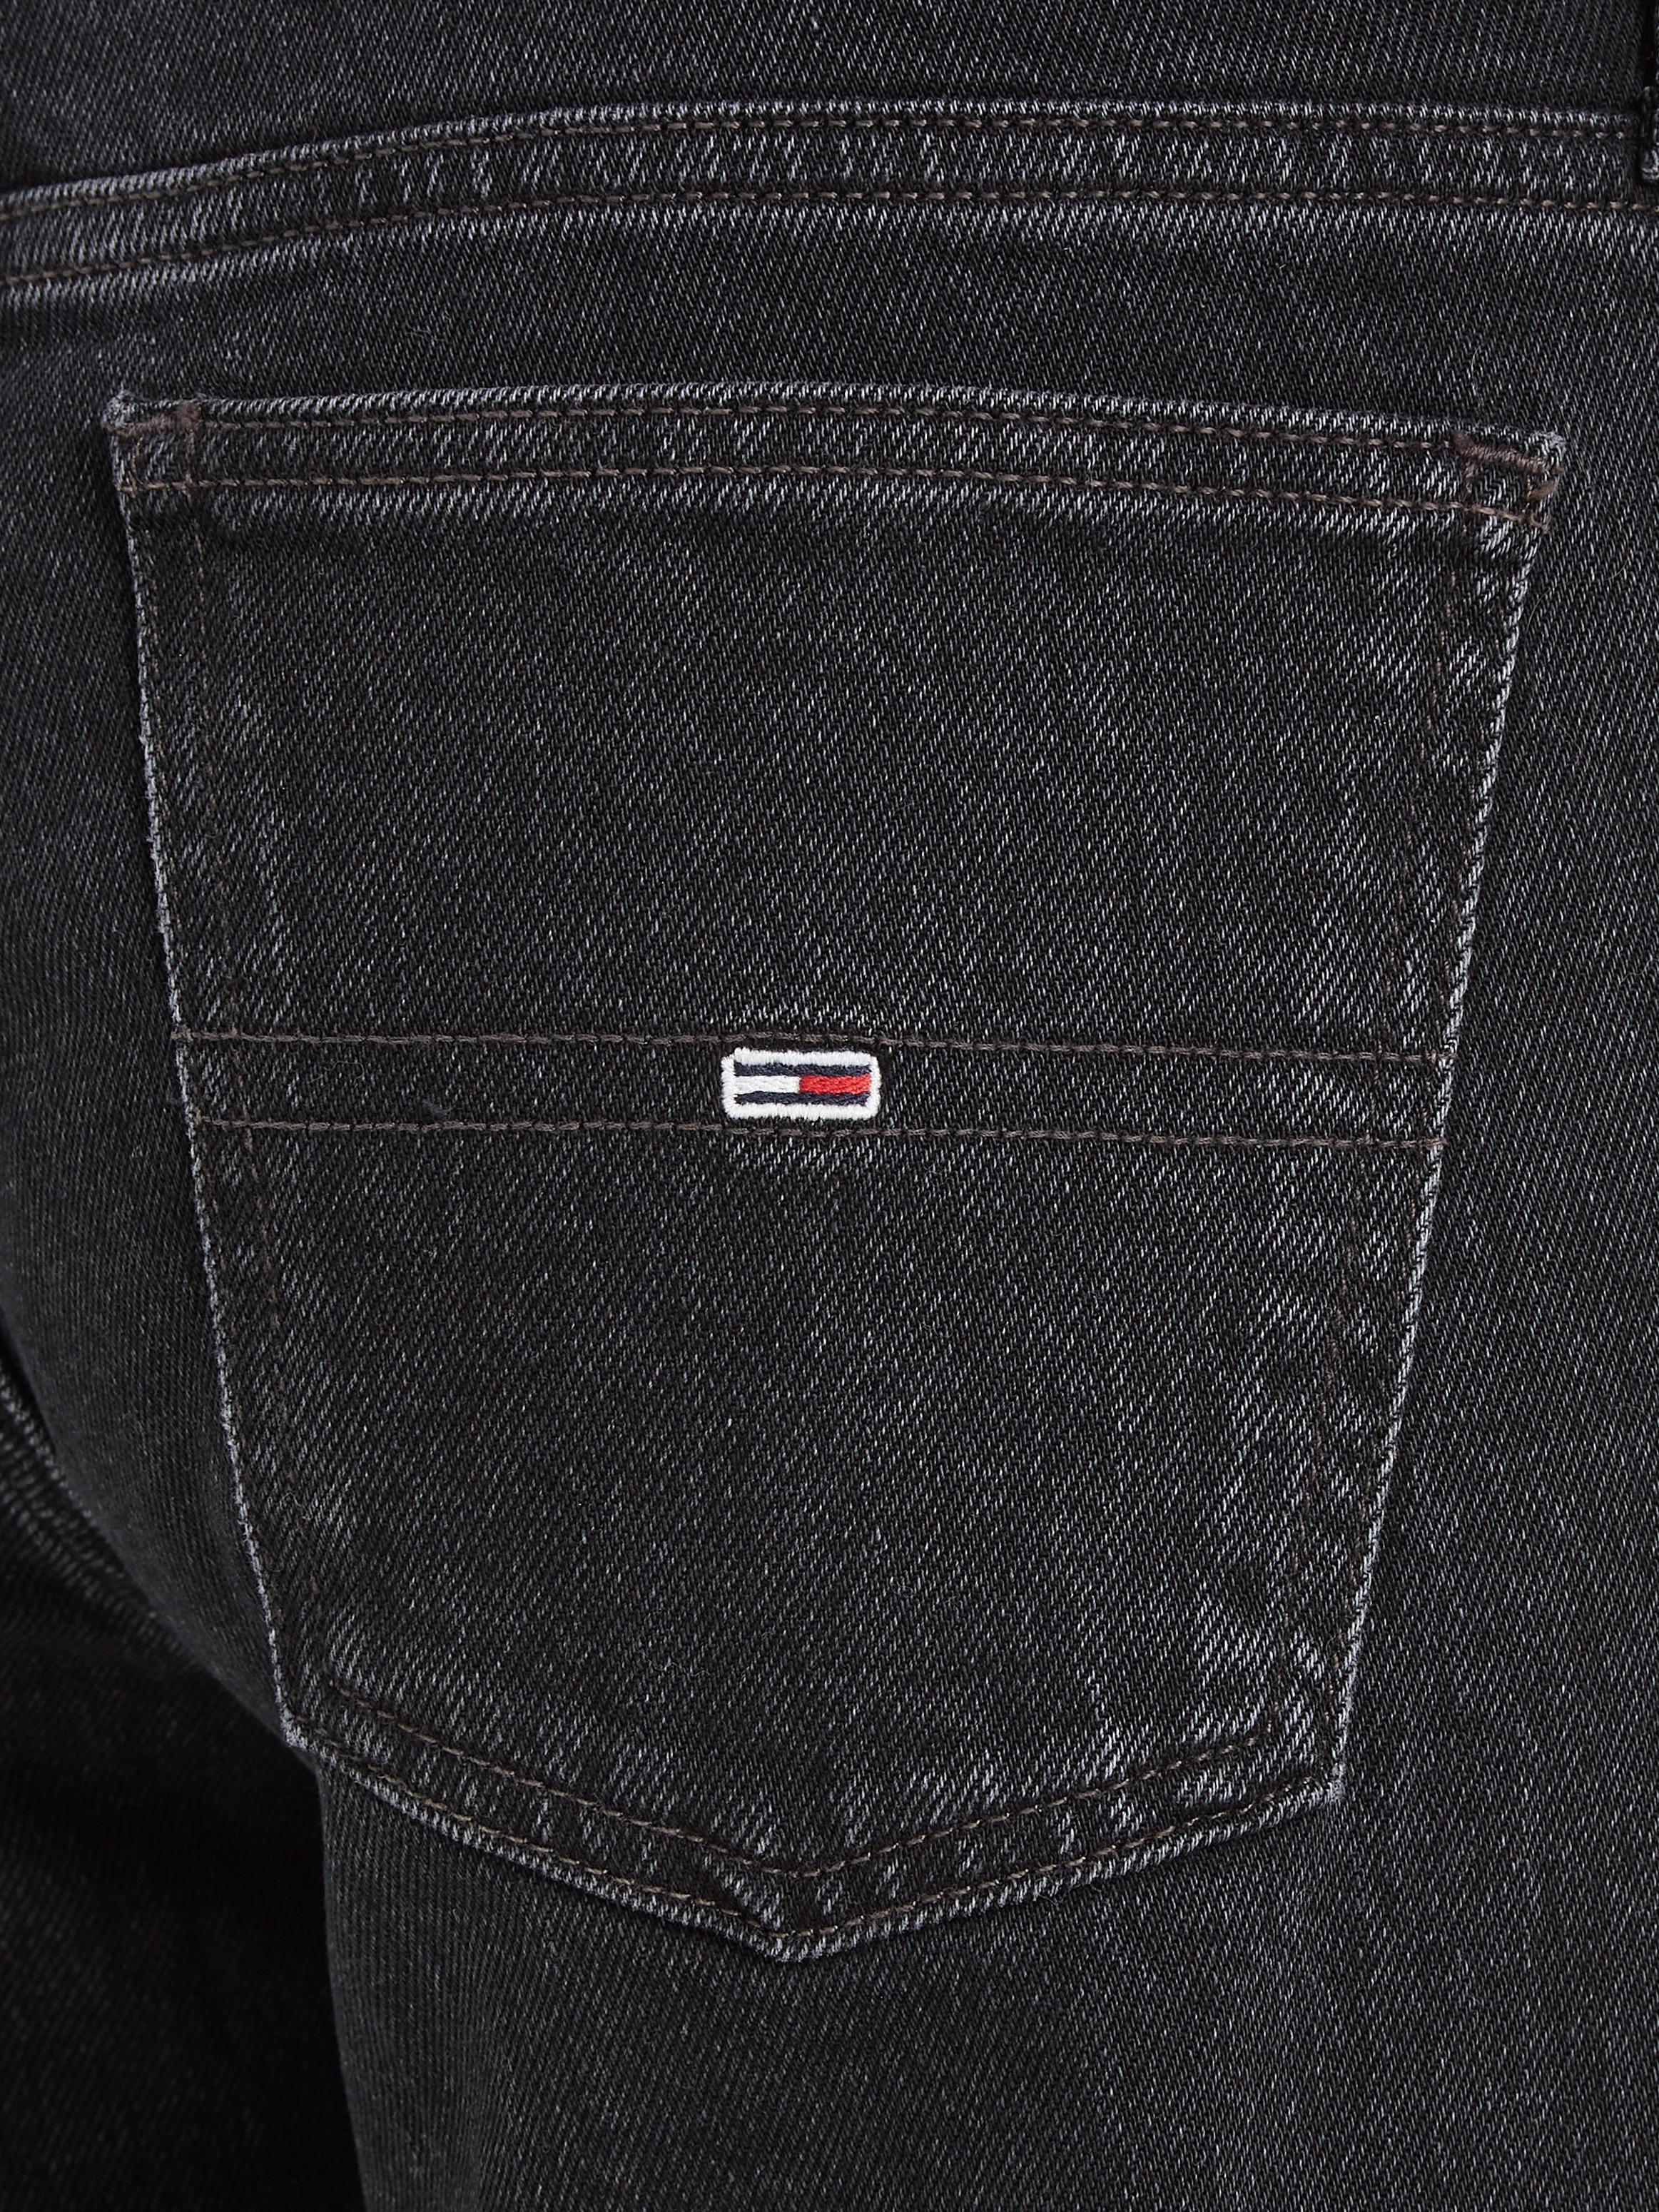 Tommy Jeans Schlagjeans, mit Logobadge ♕ Jeans Tommy bei